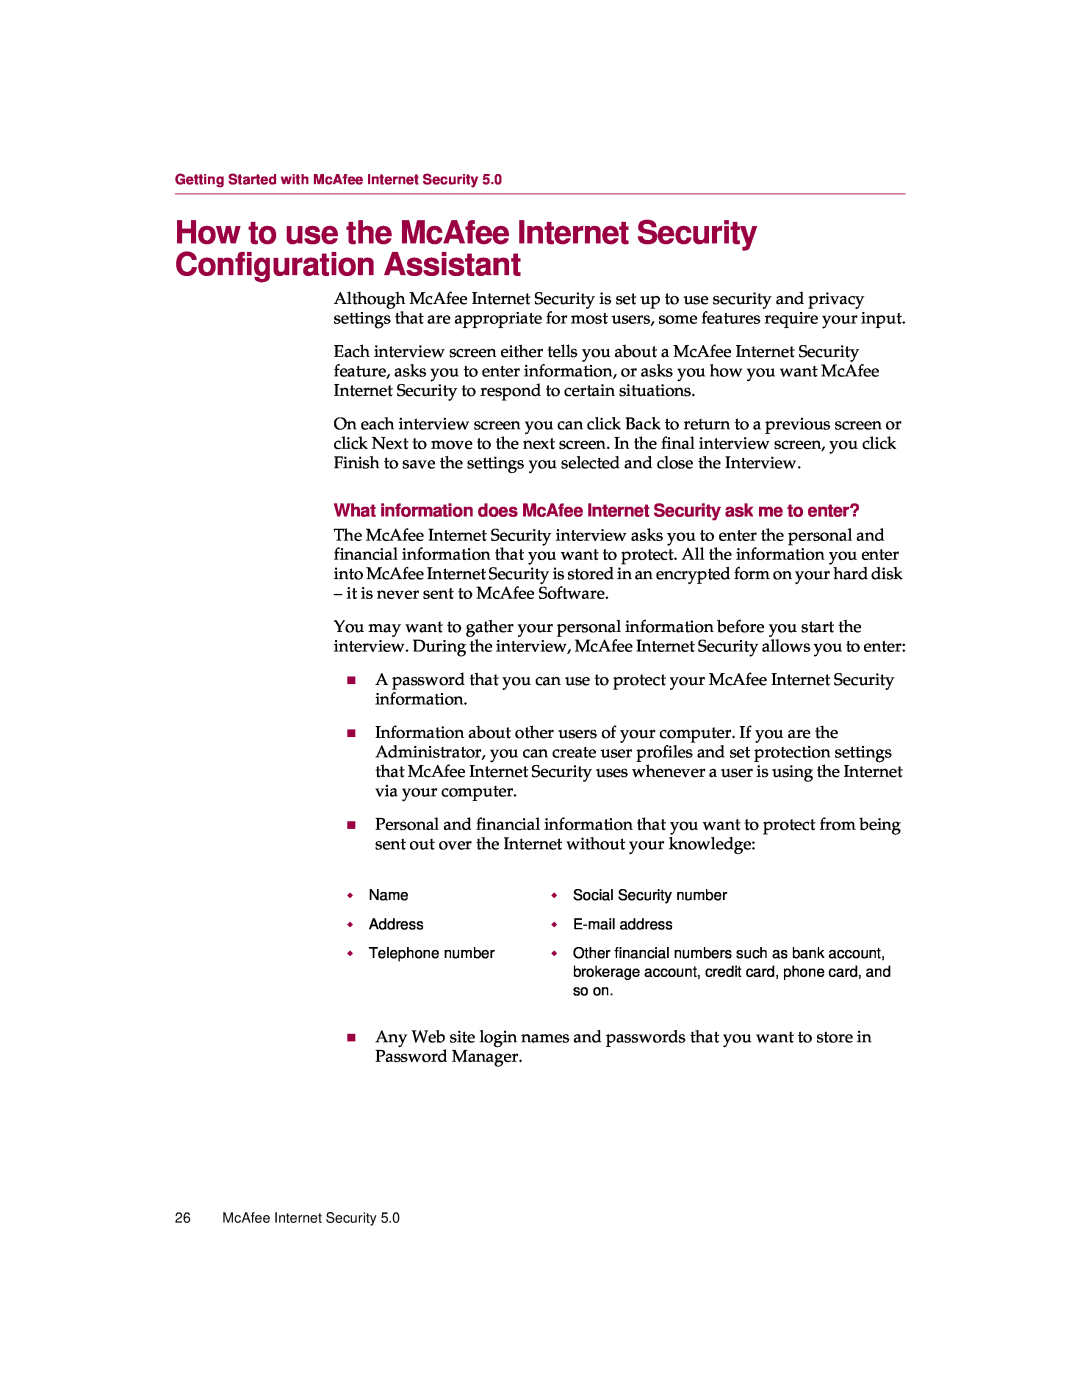 McAfee 5 manual it is never sent to McAfee Software 